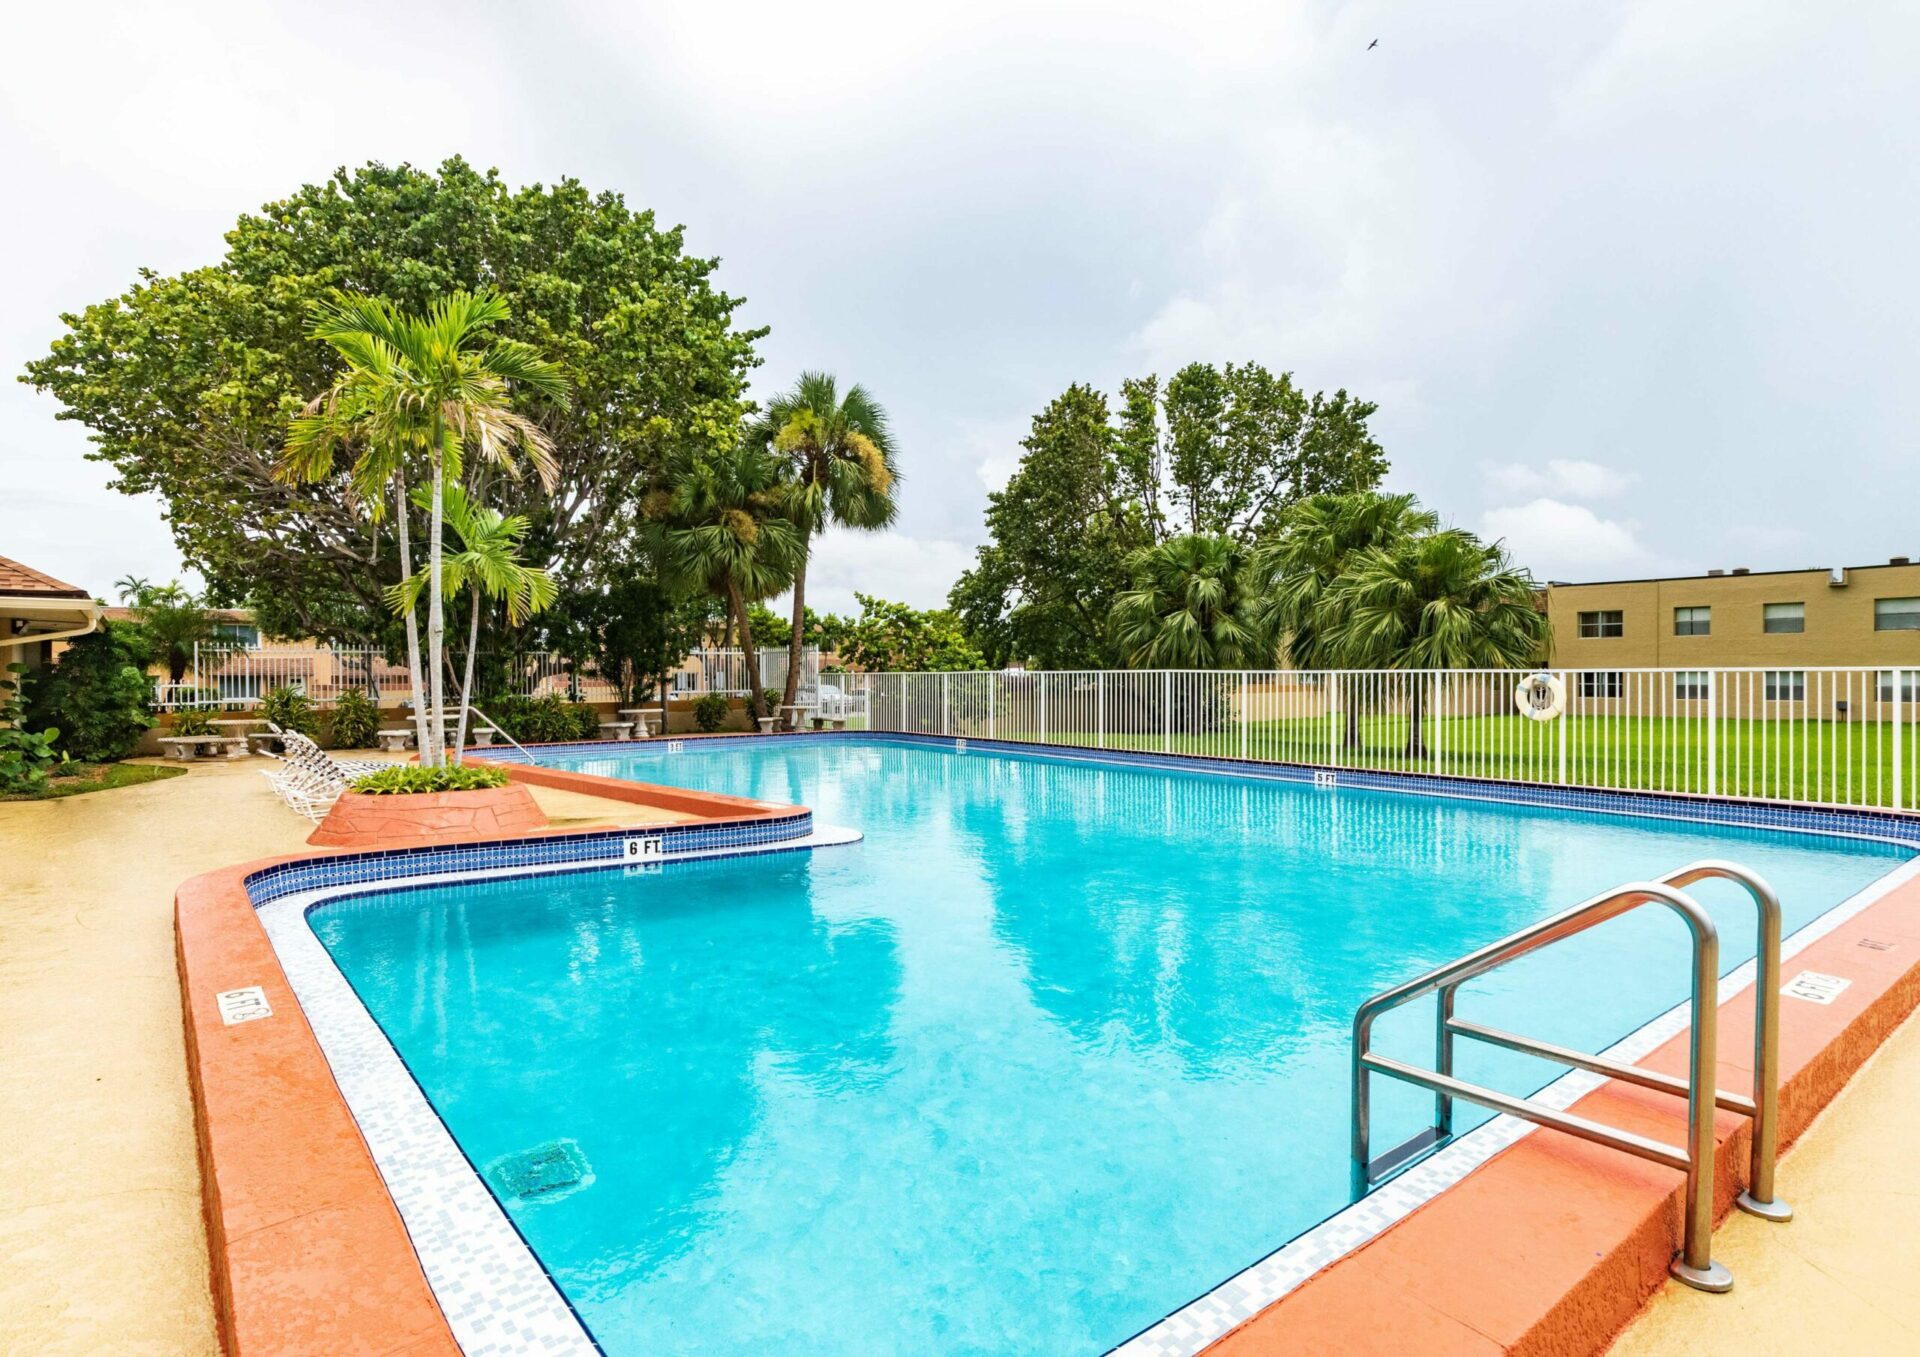 Fenced-in pool area at Green Briar West in Miami, FL.